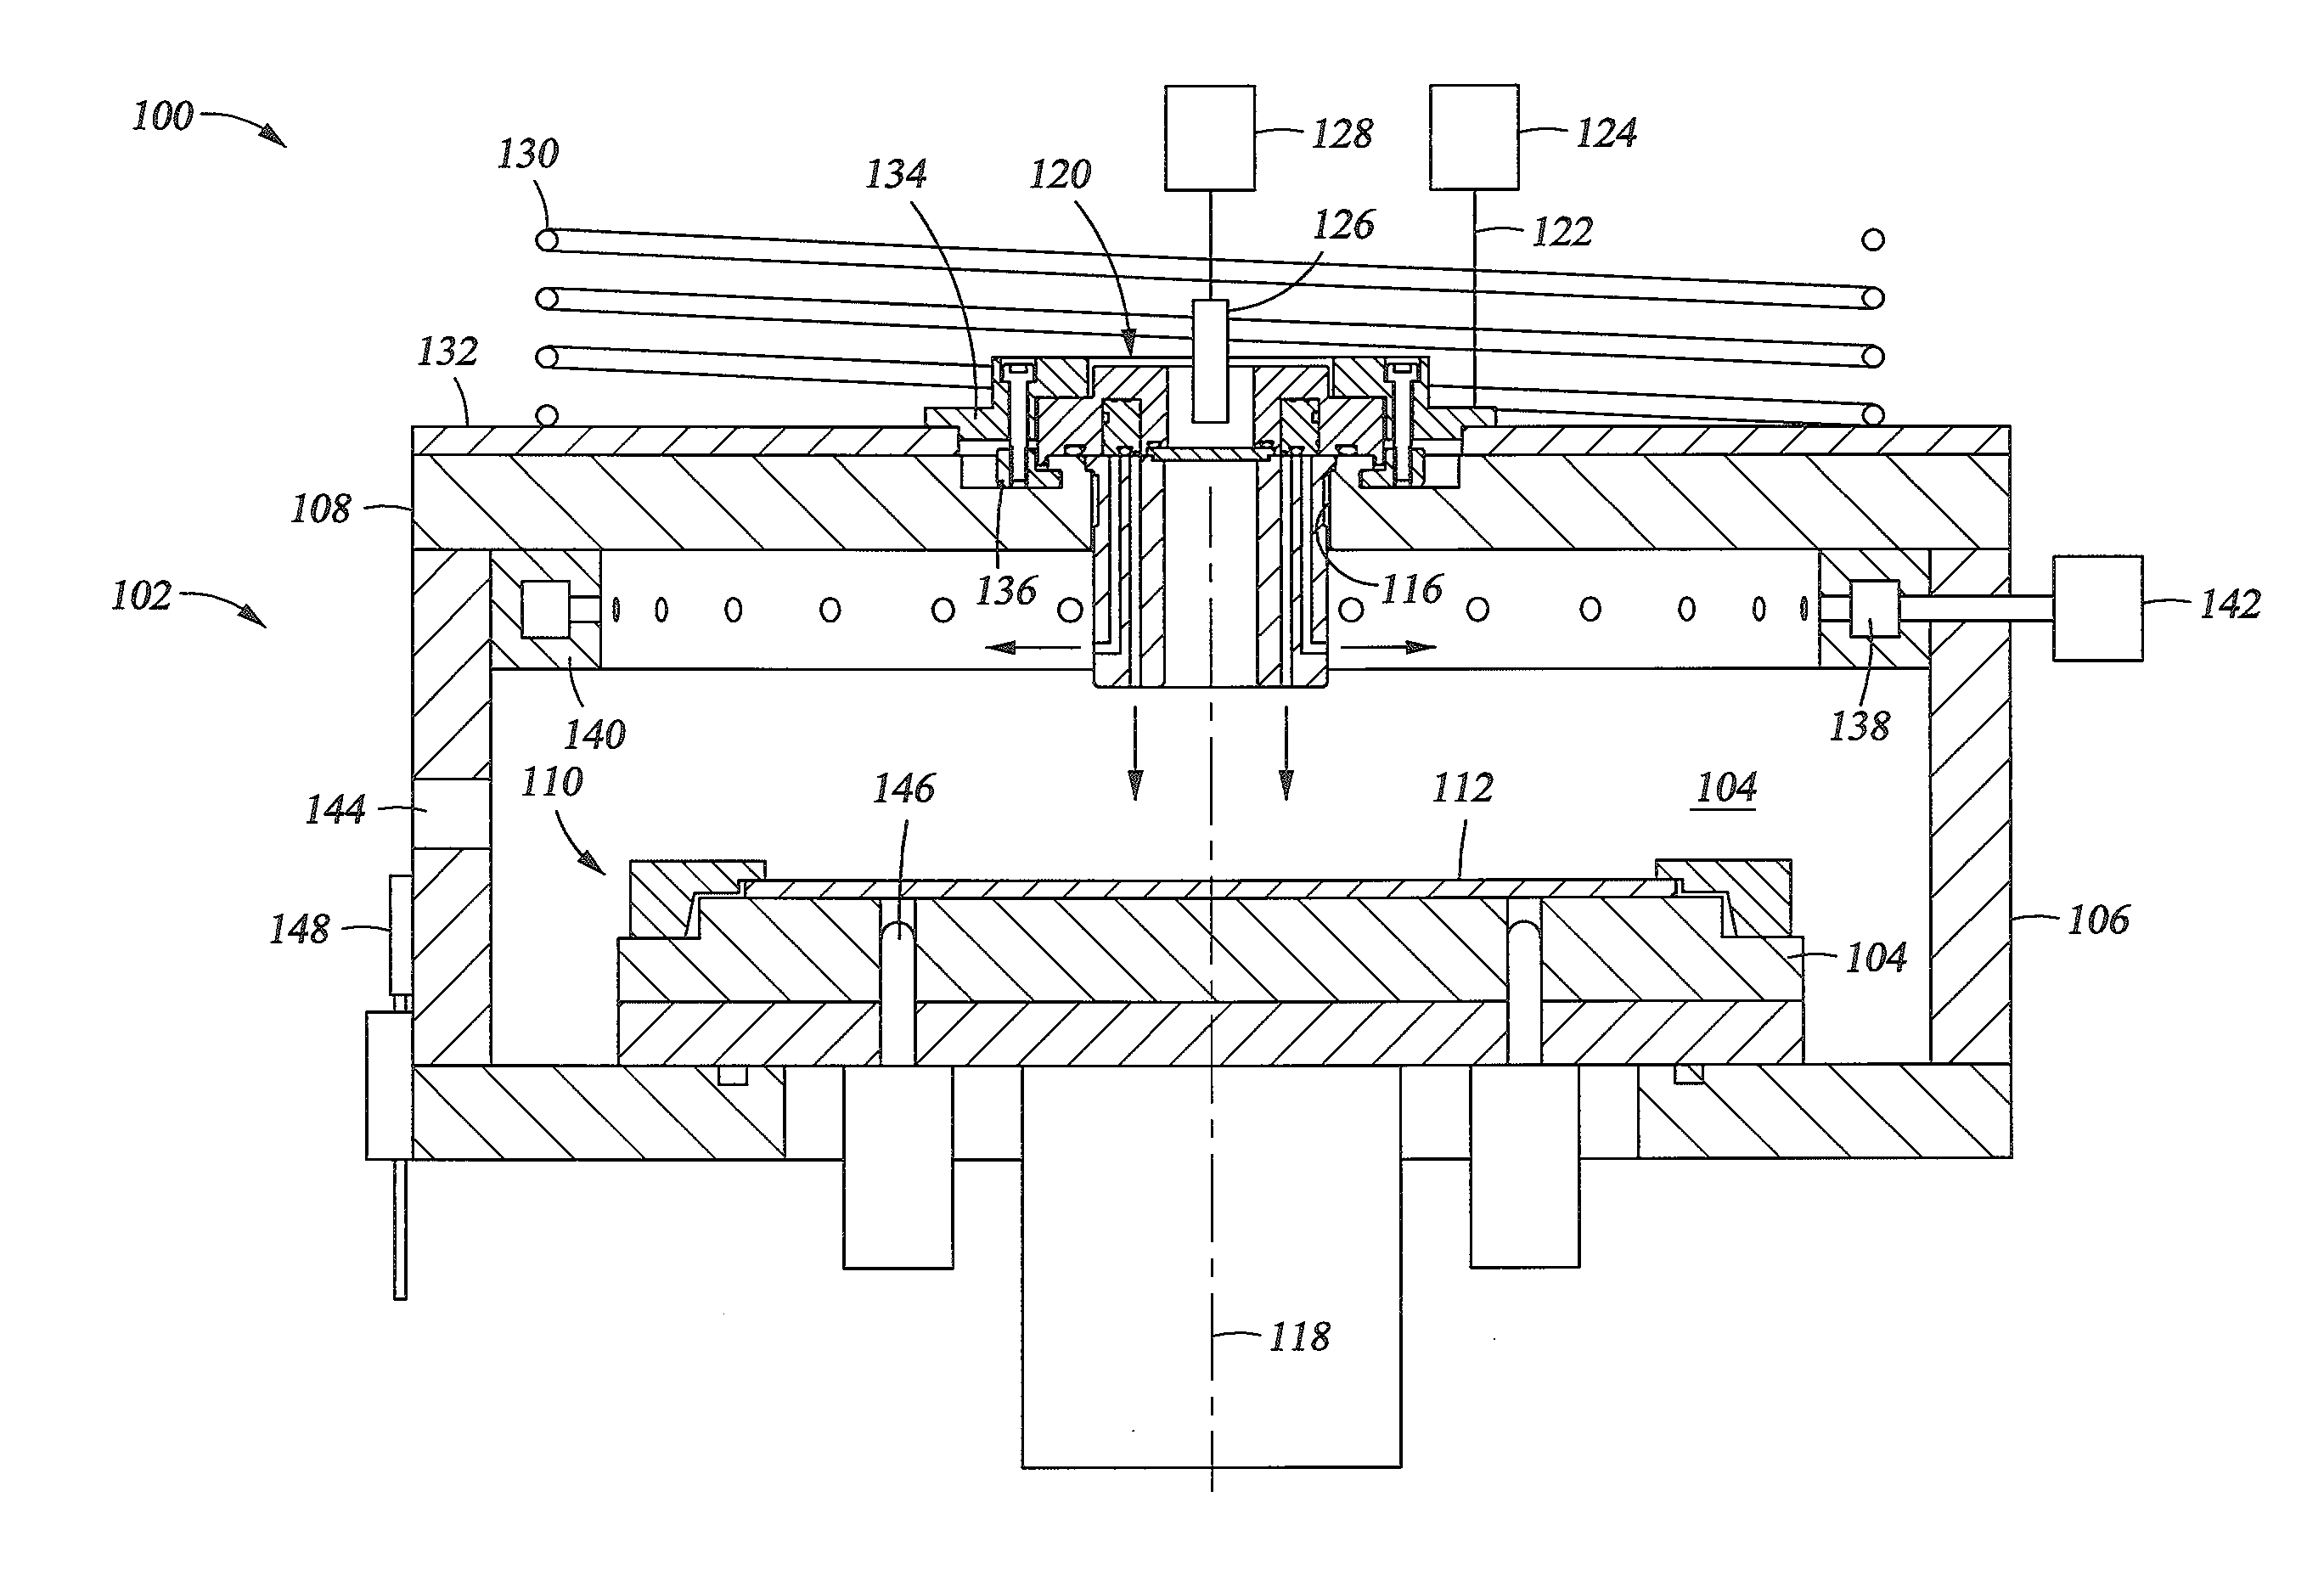 Proportional and uniform controlled gas flow delivery for dry plasma etch apparatus